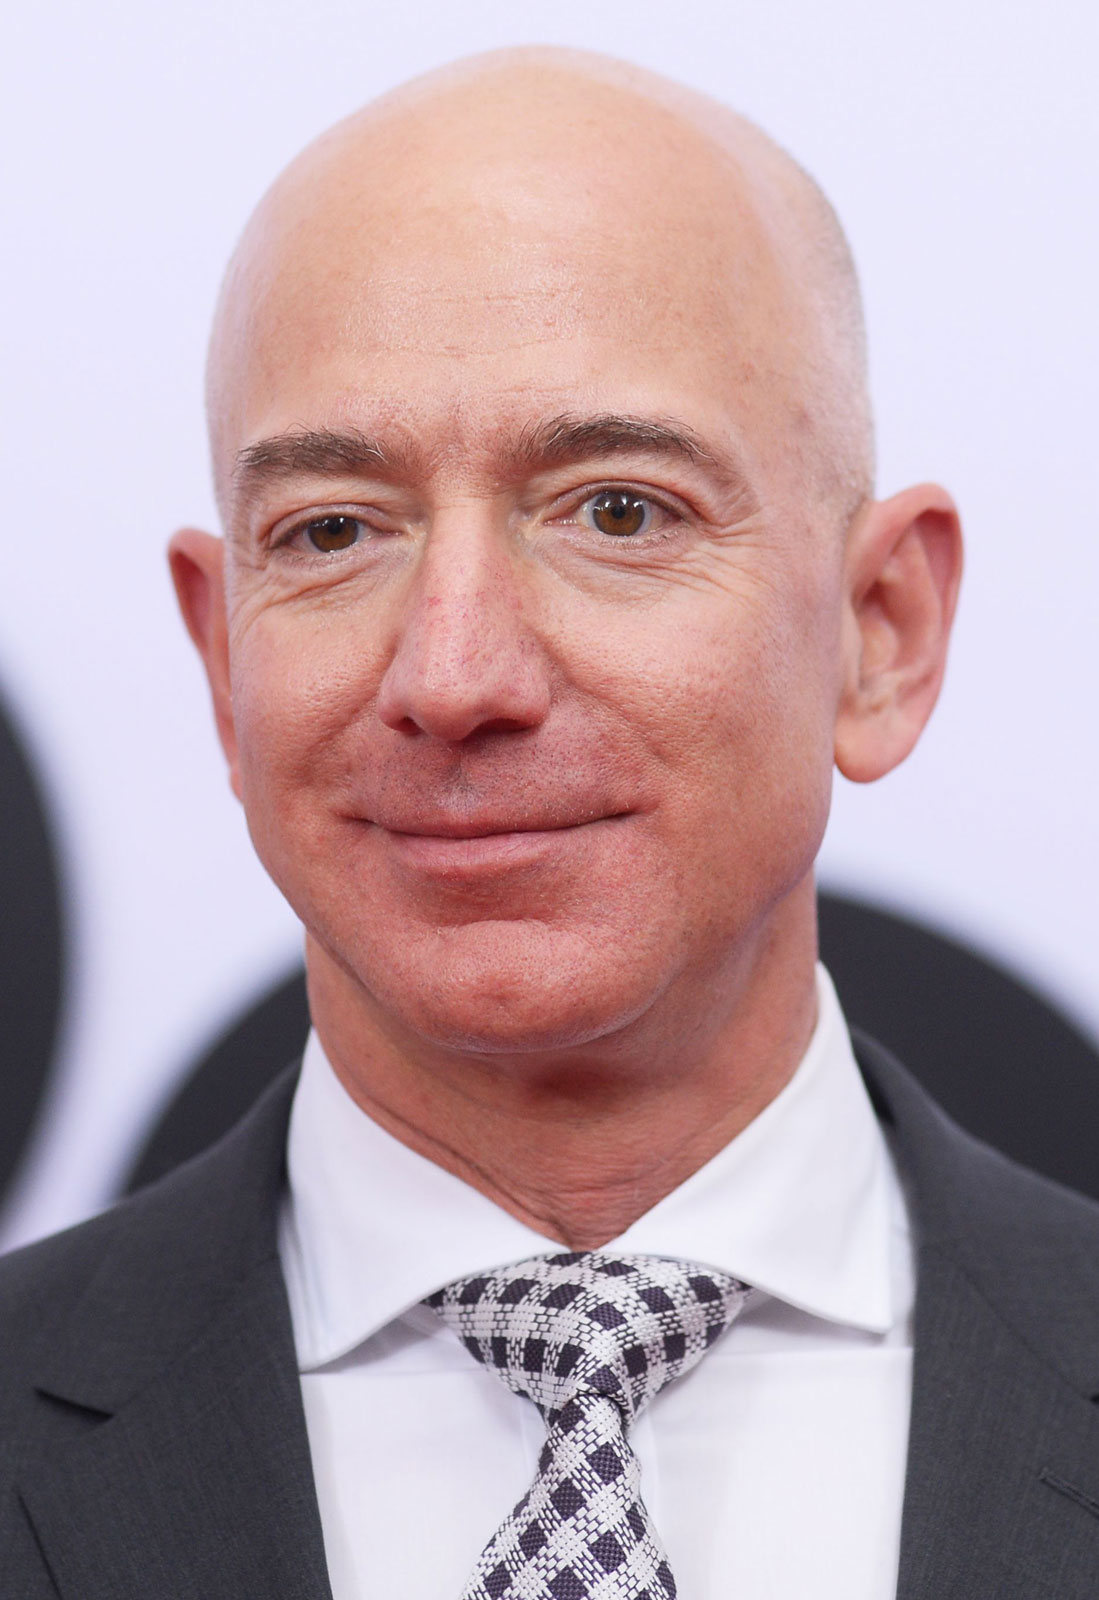 Jeff Bezos loses N492 9bn 24 hours before space expedition Angel 